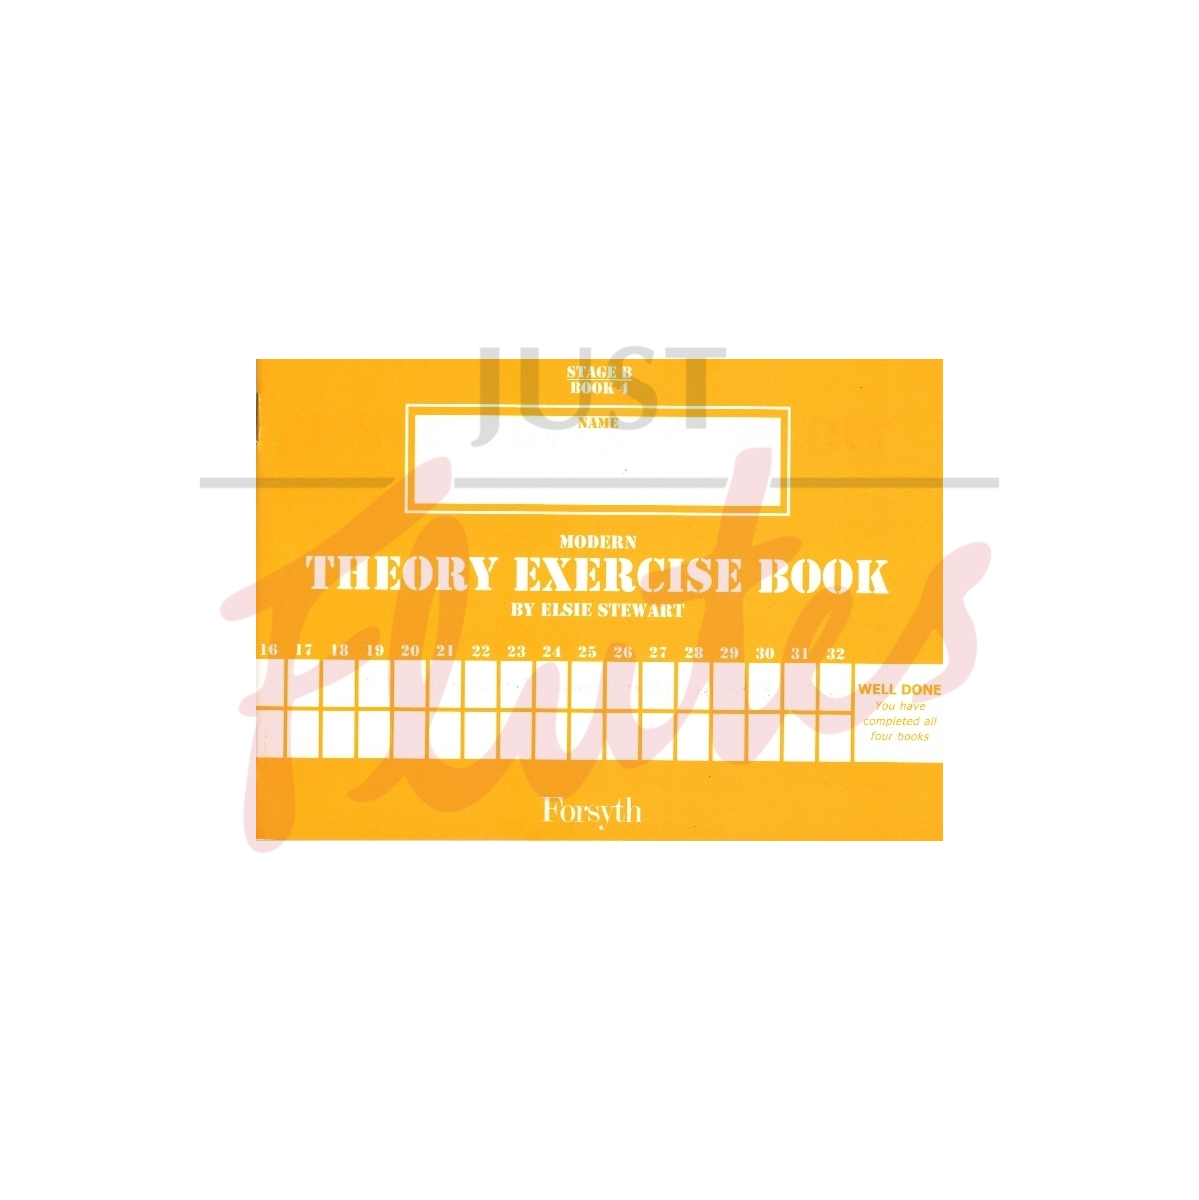 Modern Theory Exercise Book 4 Stage B